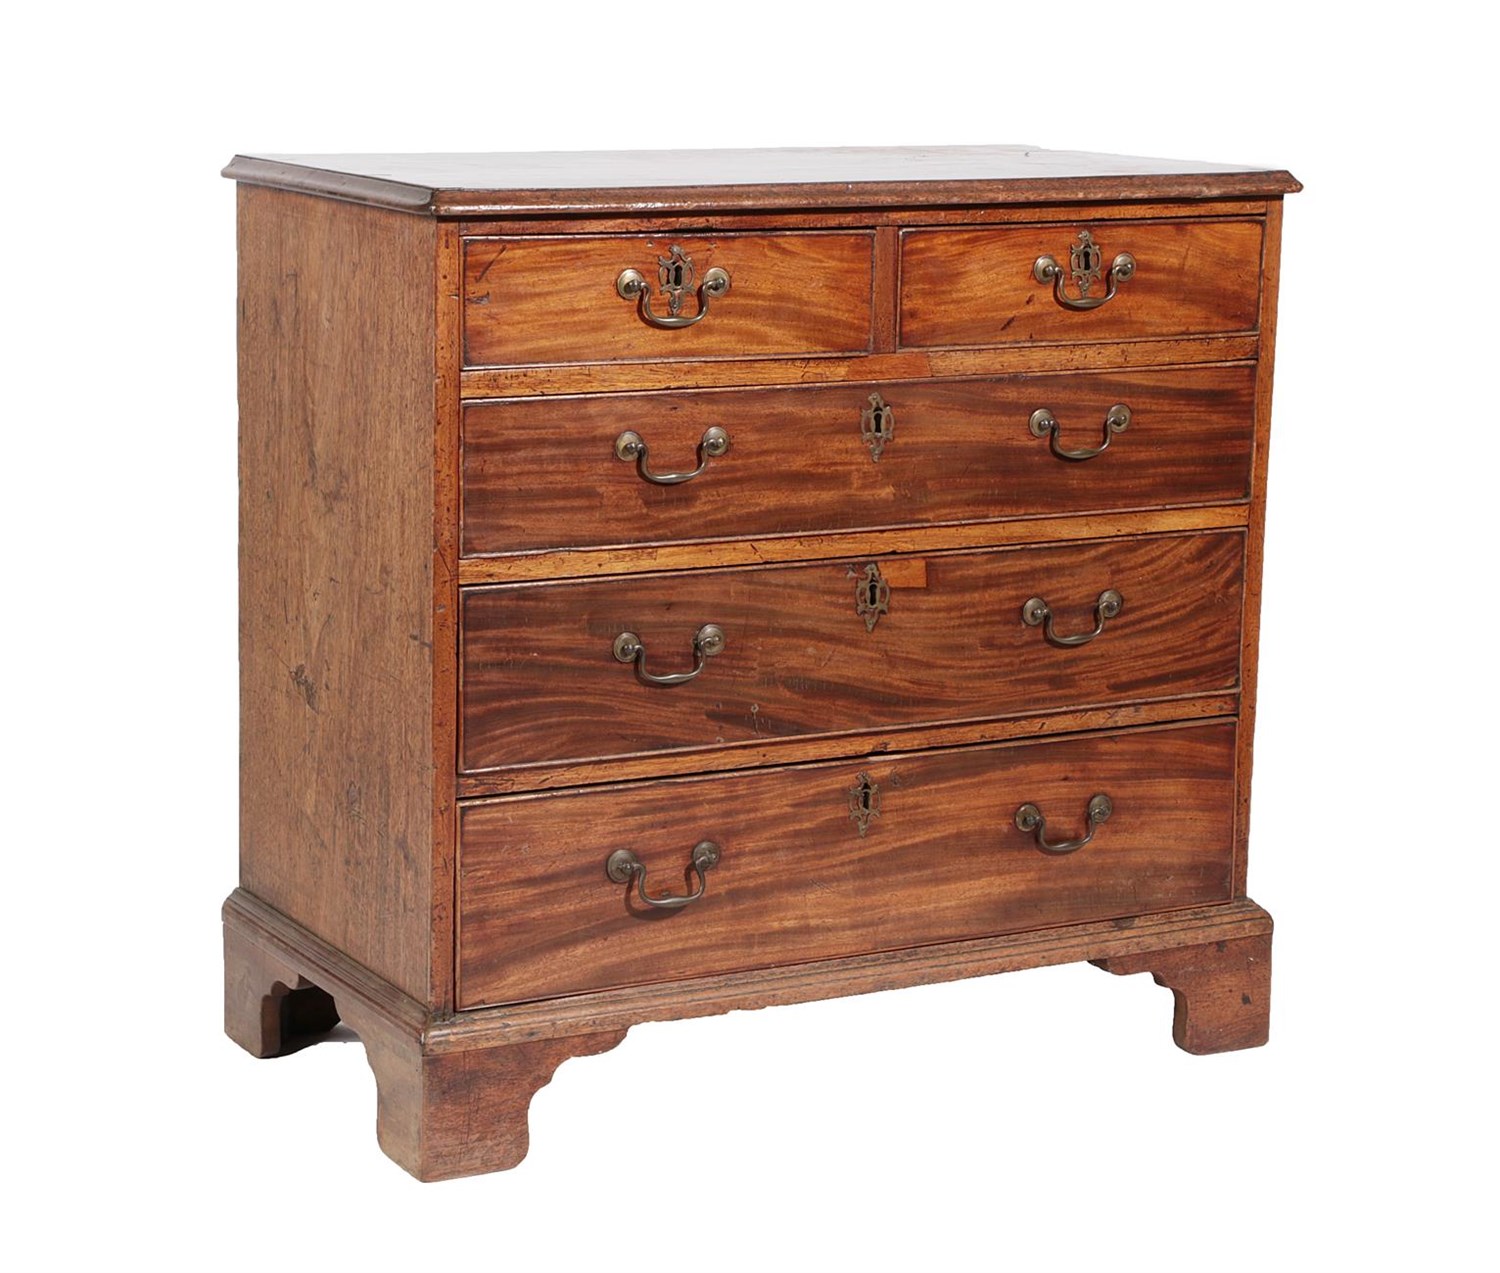 Lot 578 - ~ A George III Mahogany and Crossbanded Straight Front Chest of Drawers, late 18th century, the...